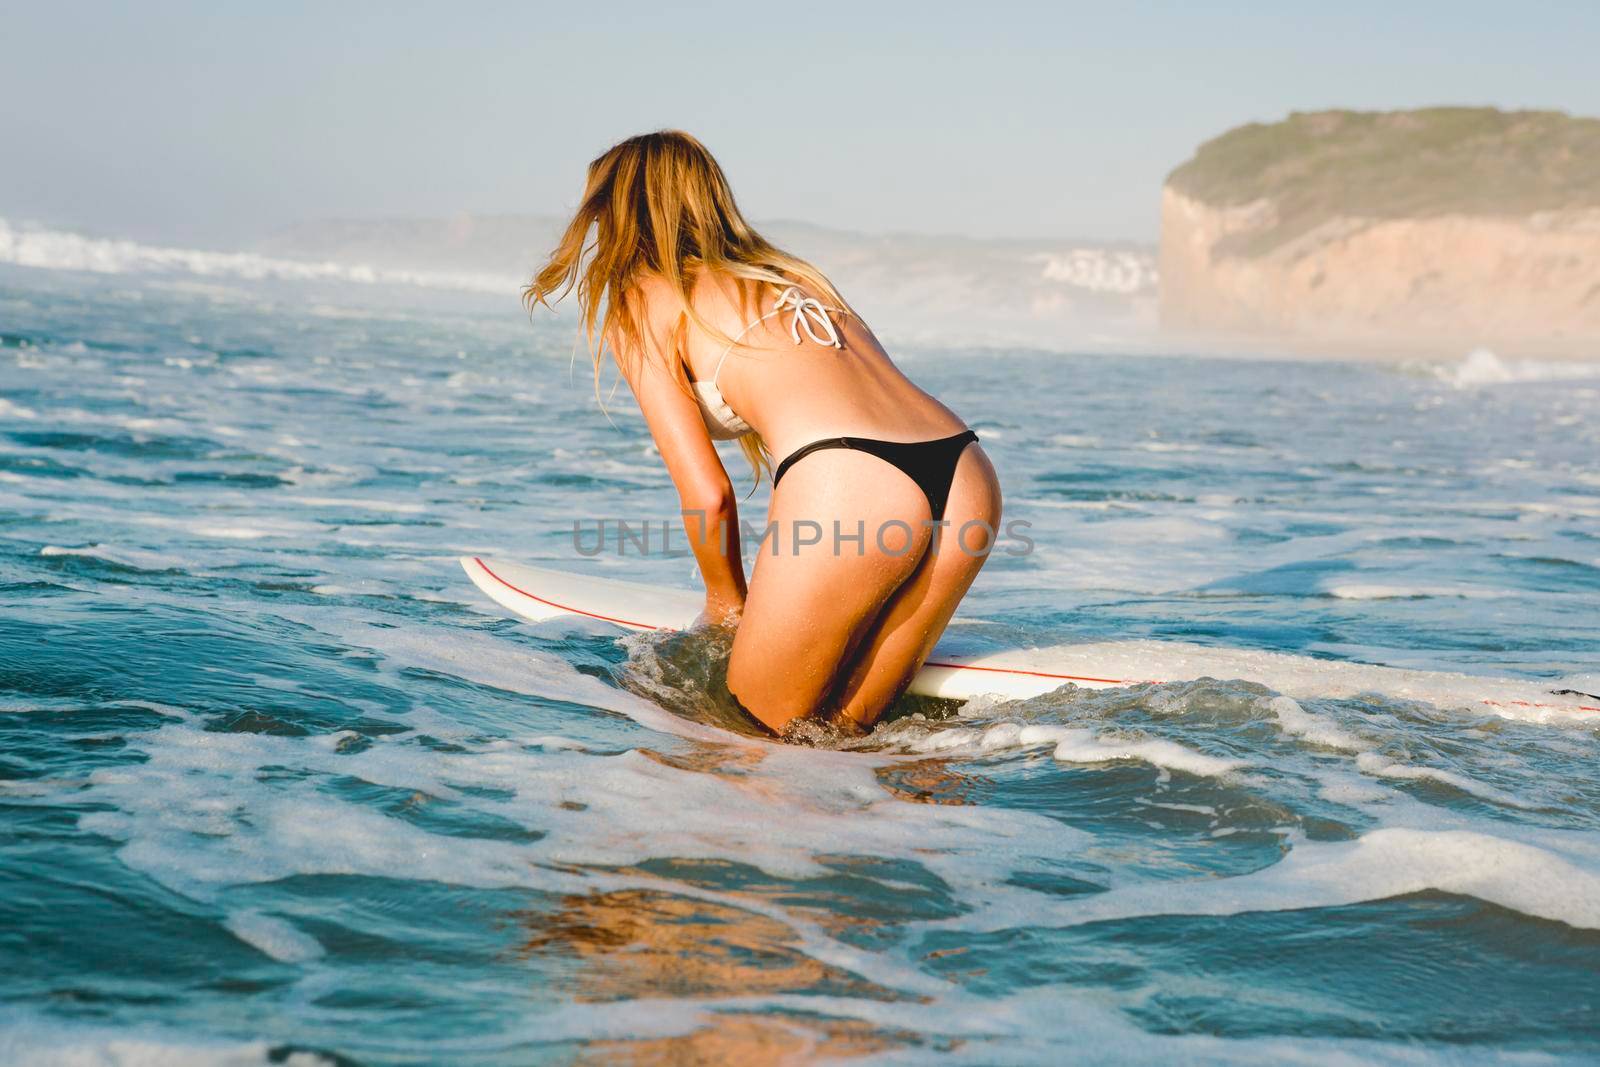 Beautiful woman on the beach going to surf